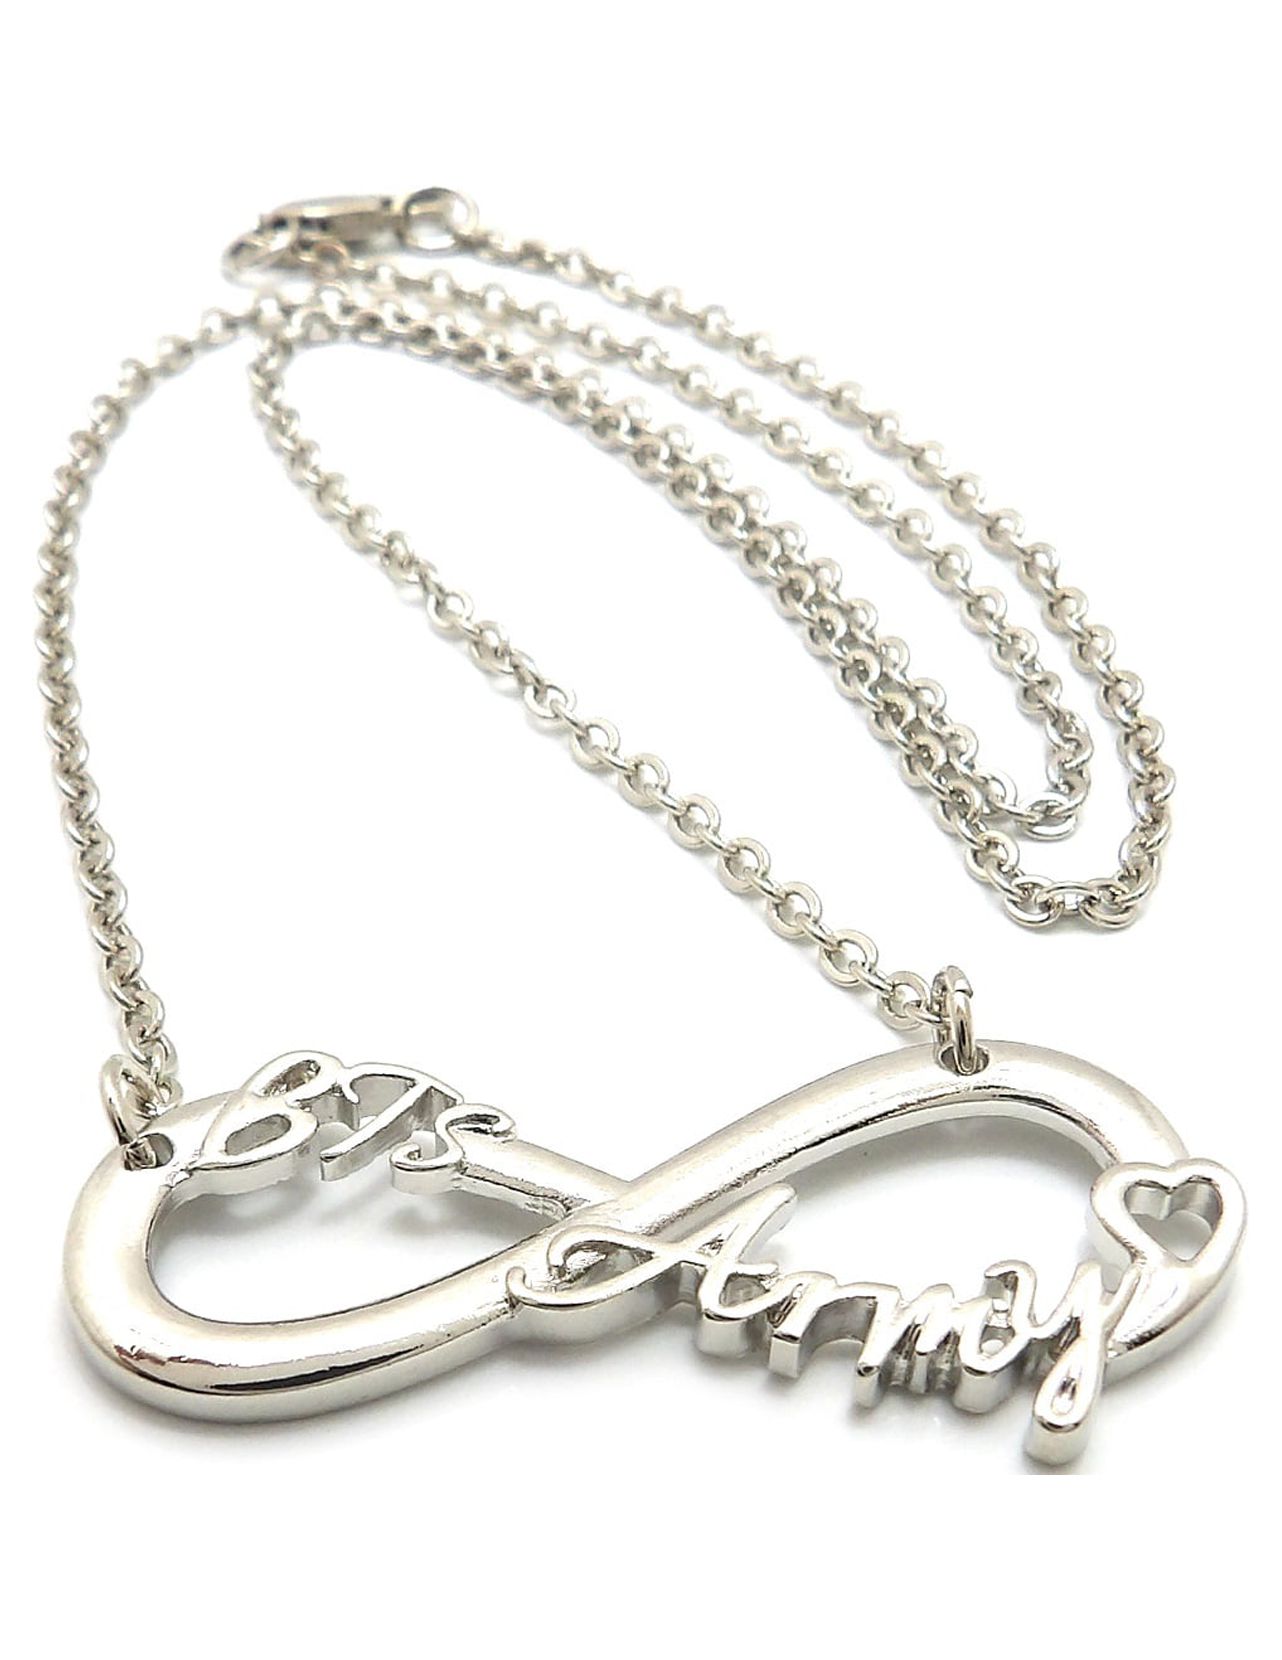 BTS Army Fans Infinity Sign Pendant with 2mm 18" Link Chain Necklace in Silver-Tone, BTS Army - image 2 of 4